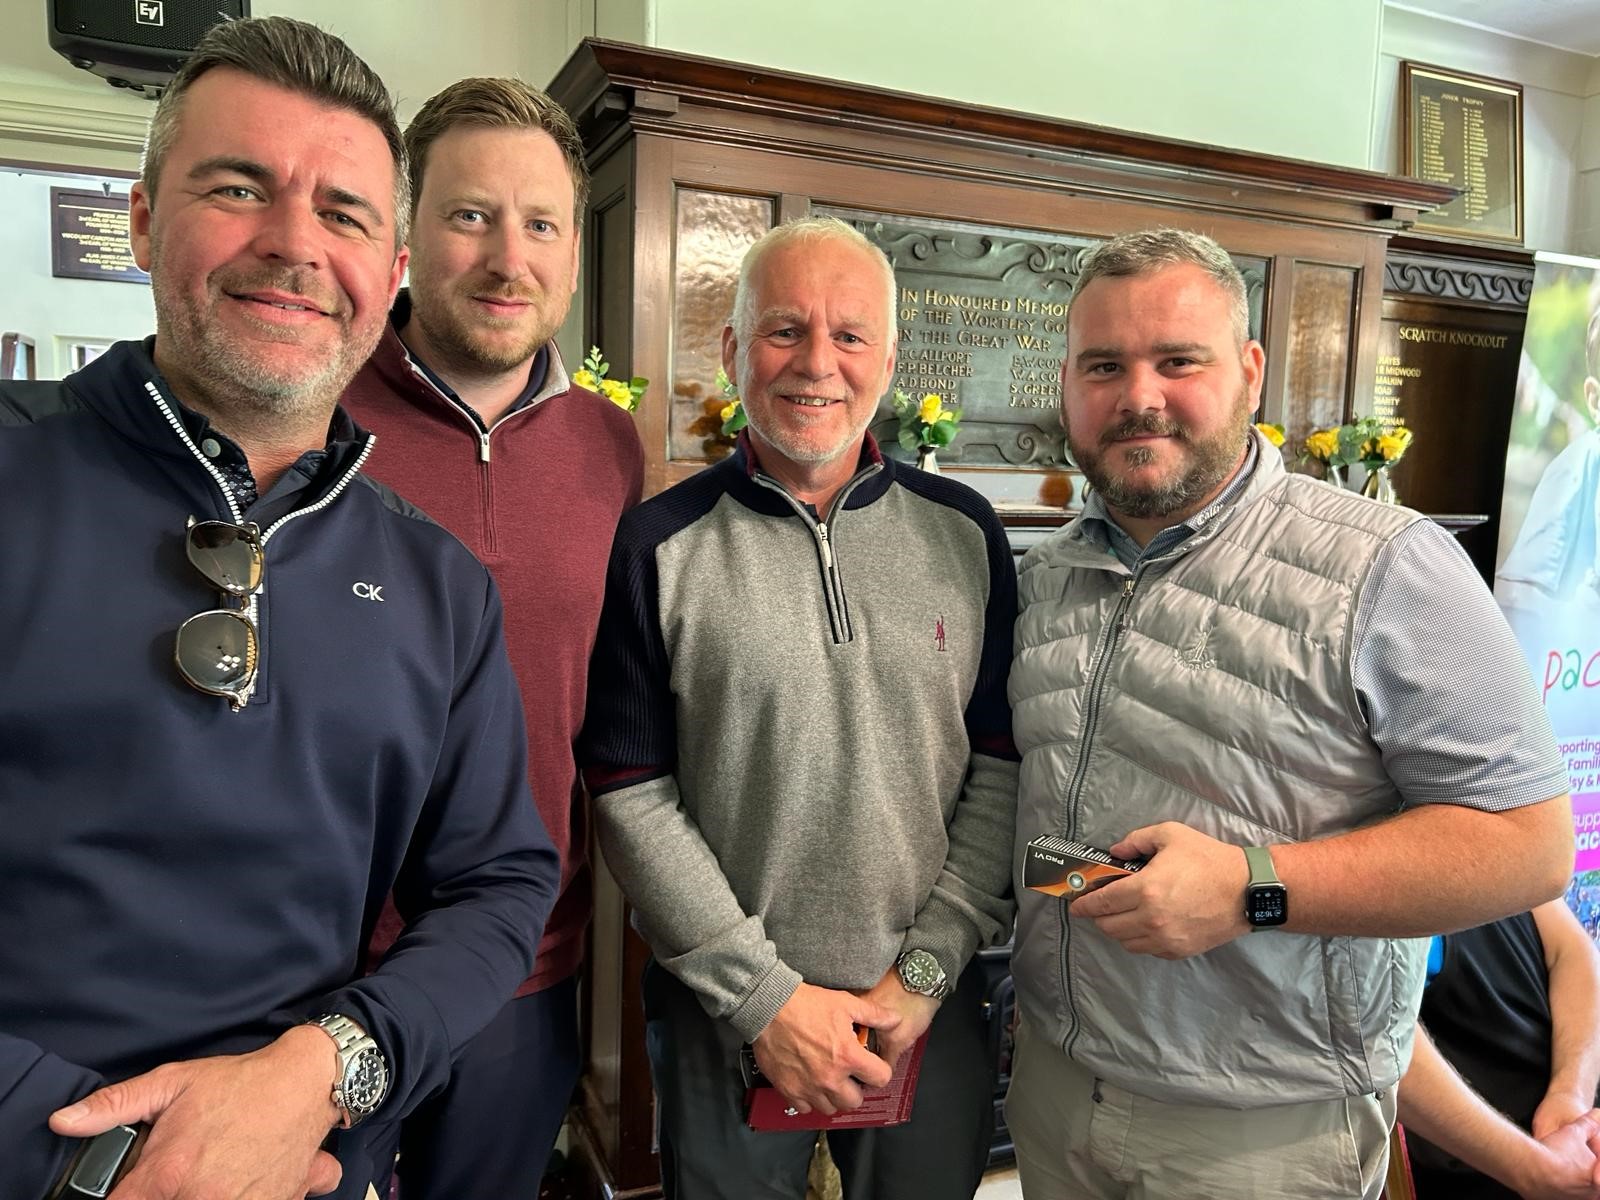 CSP Systems Ltd Golf Day Success: Raising Funds and Building Connections at Wortley Golf Club